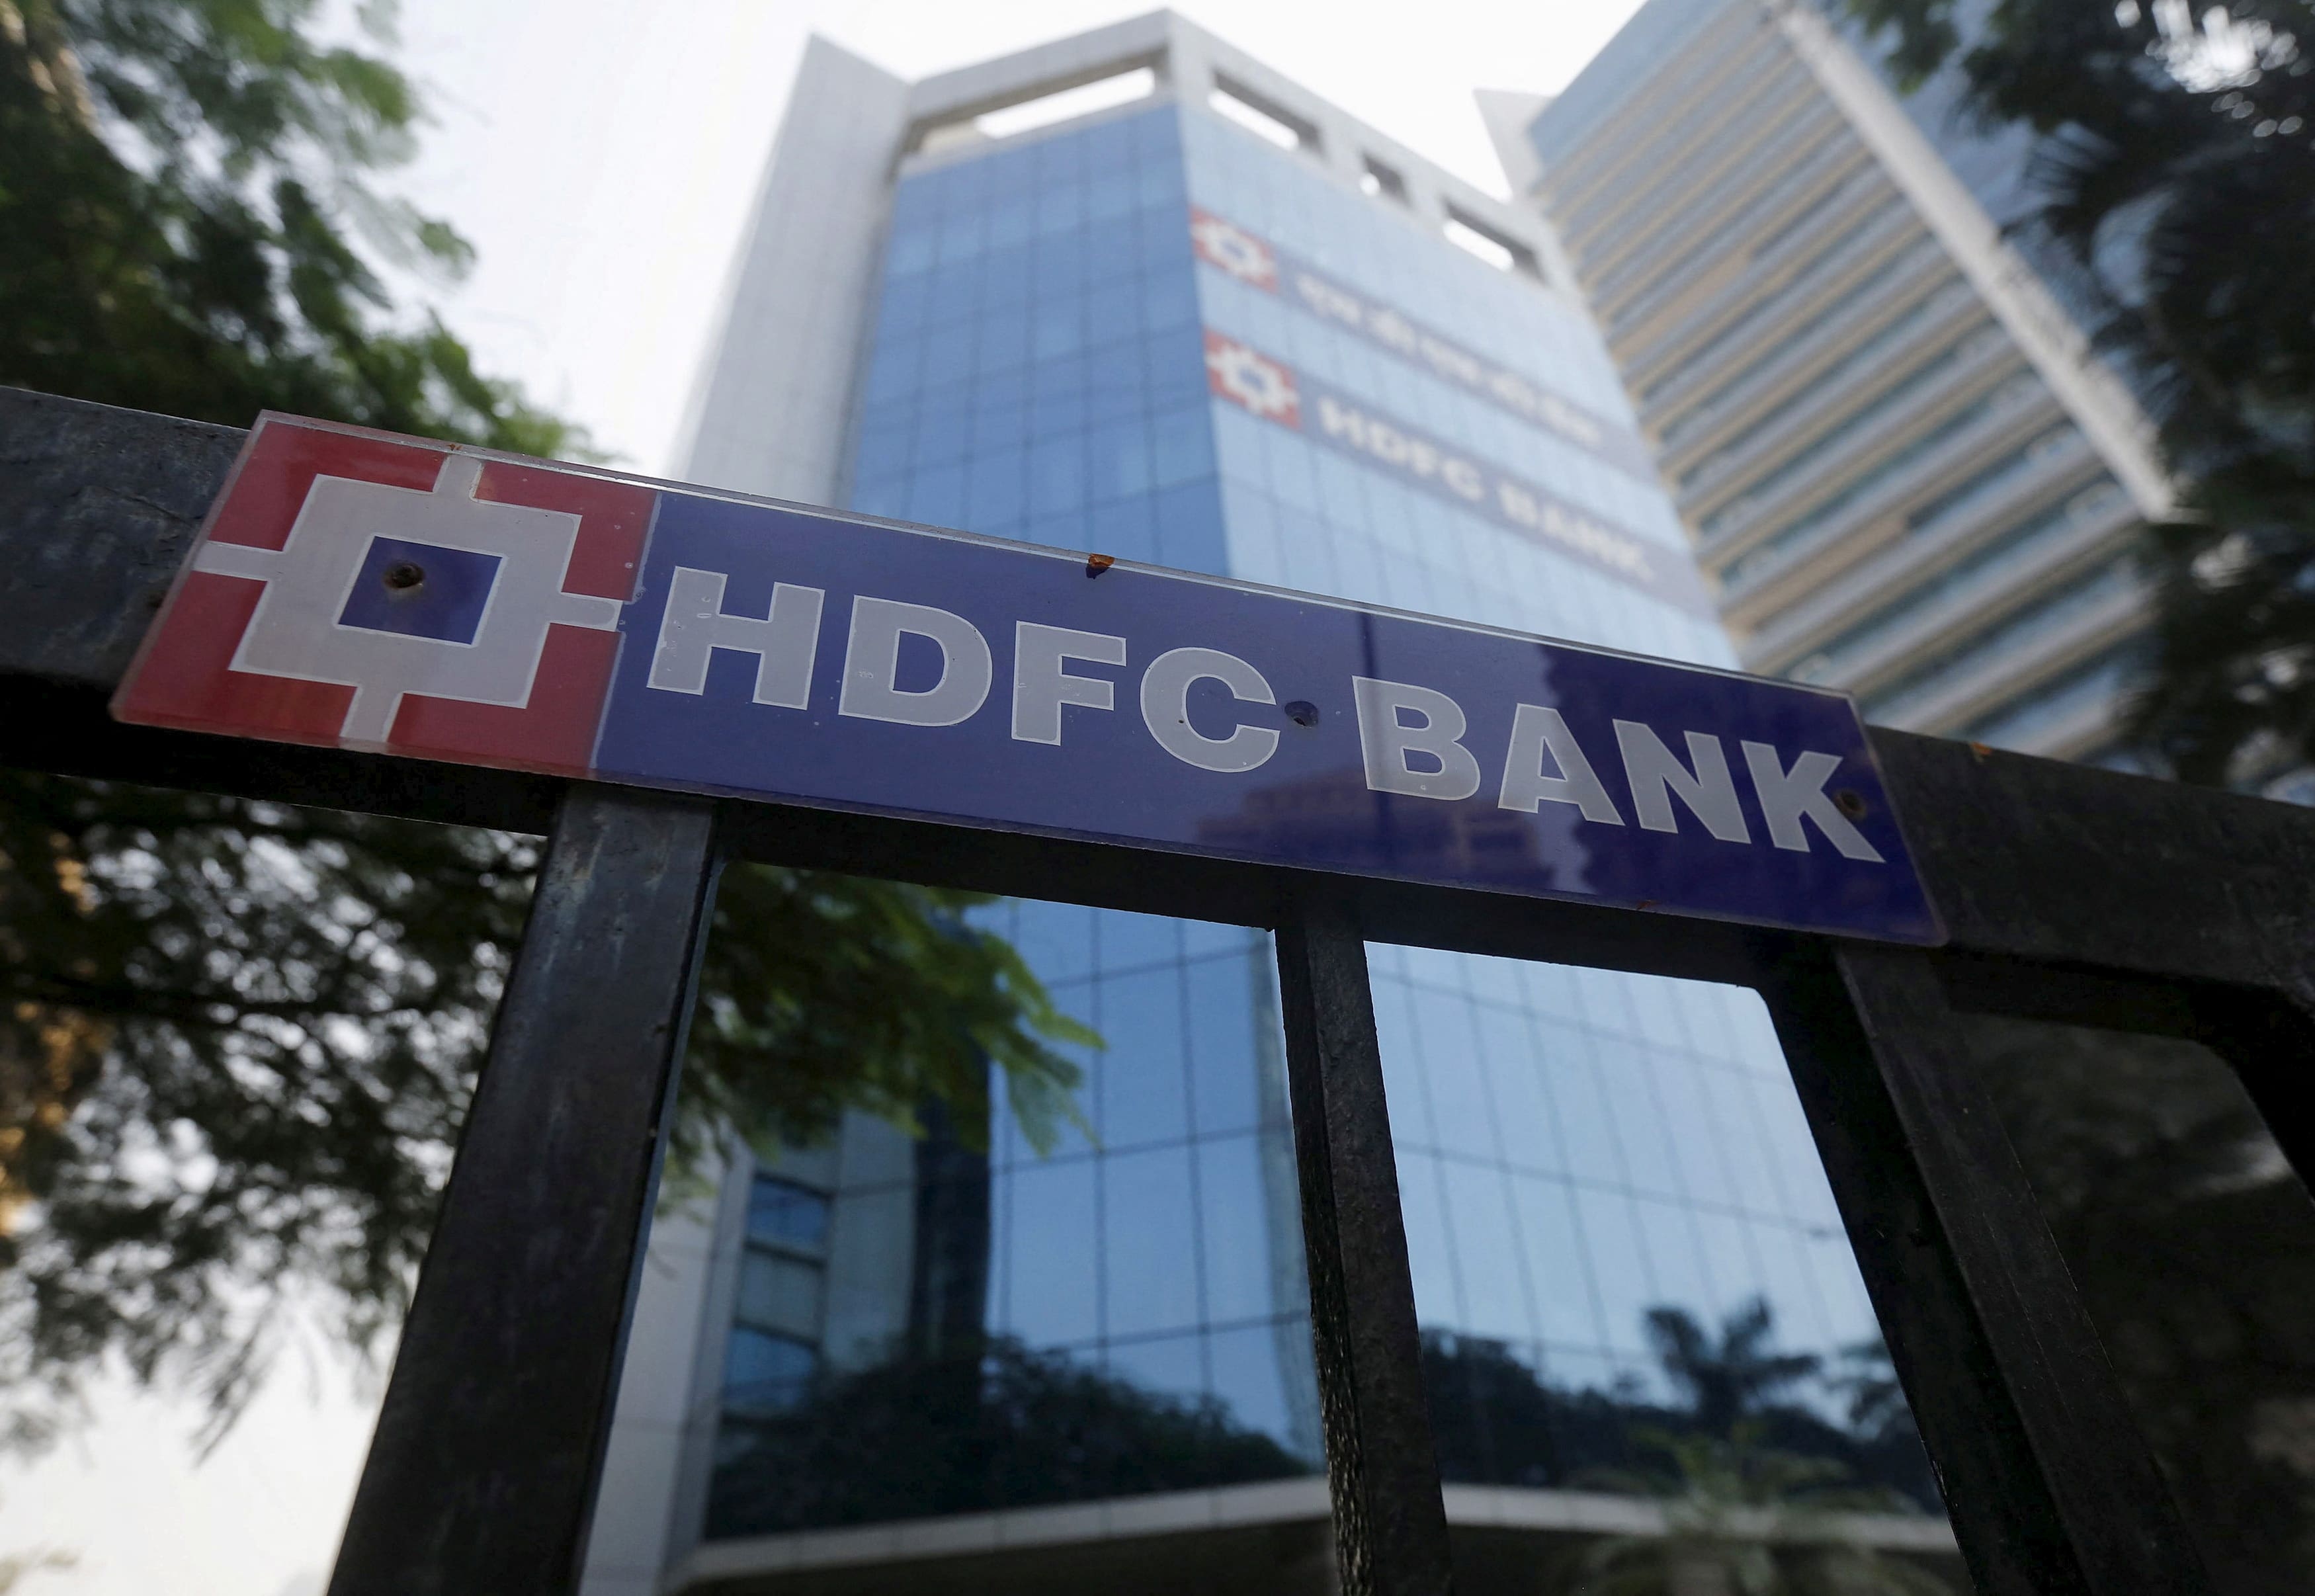 HDFC Bank's stock has underperformed its benchmark due to merger-related turbulence, but analysts remain positive on its long-term prospects.